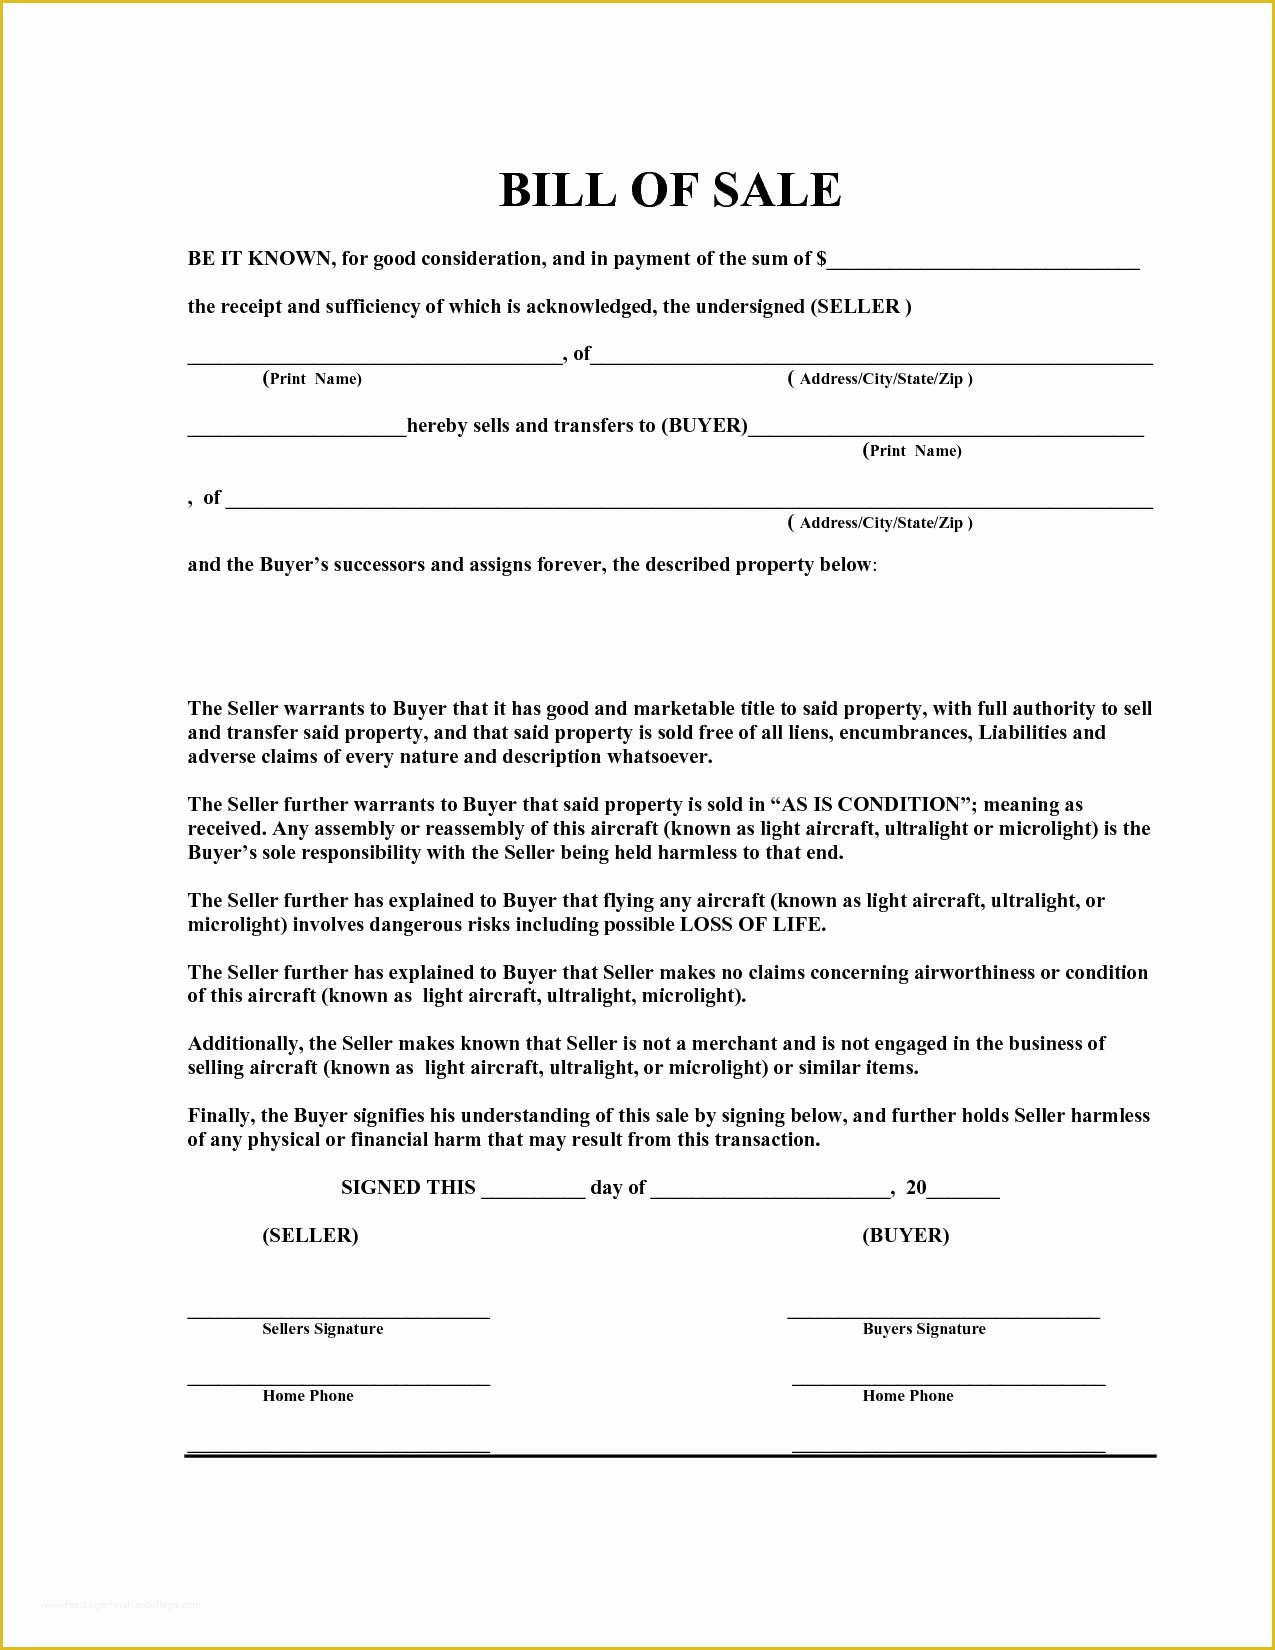 Free Bill Of Sale Template Of Free Bill Of Sale Template Pdf by Marymenti as is Bill